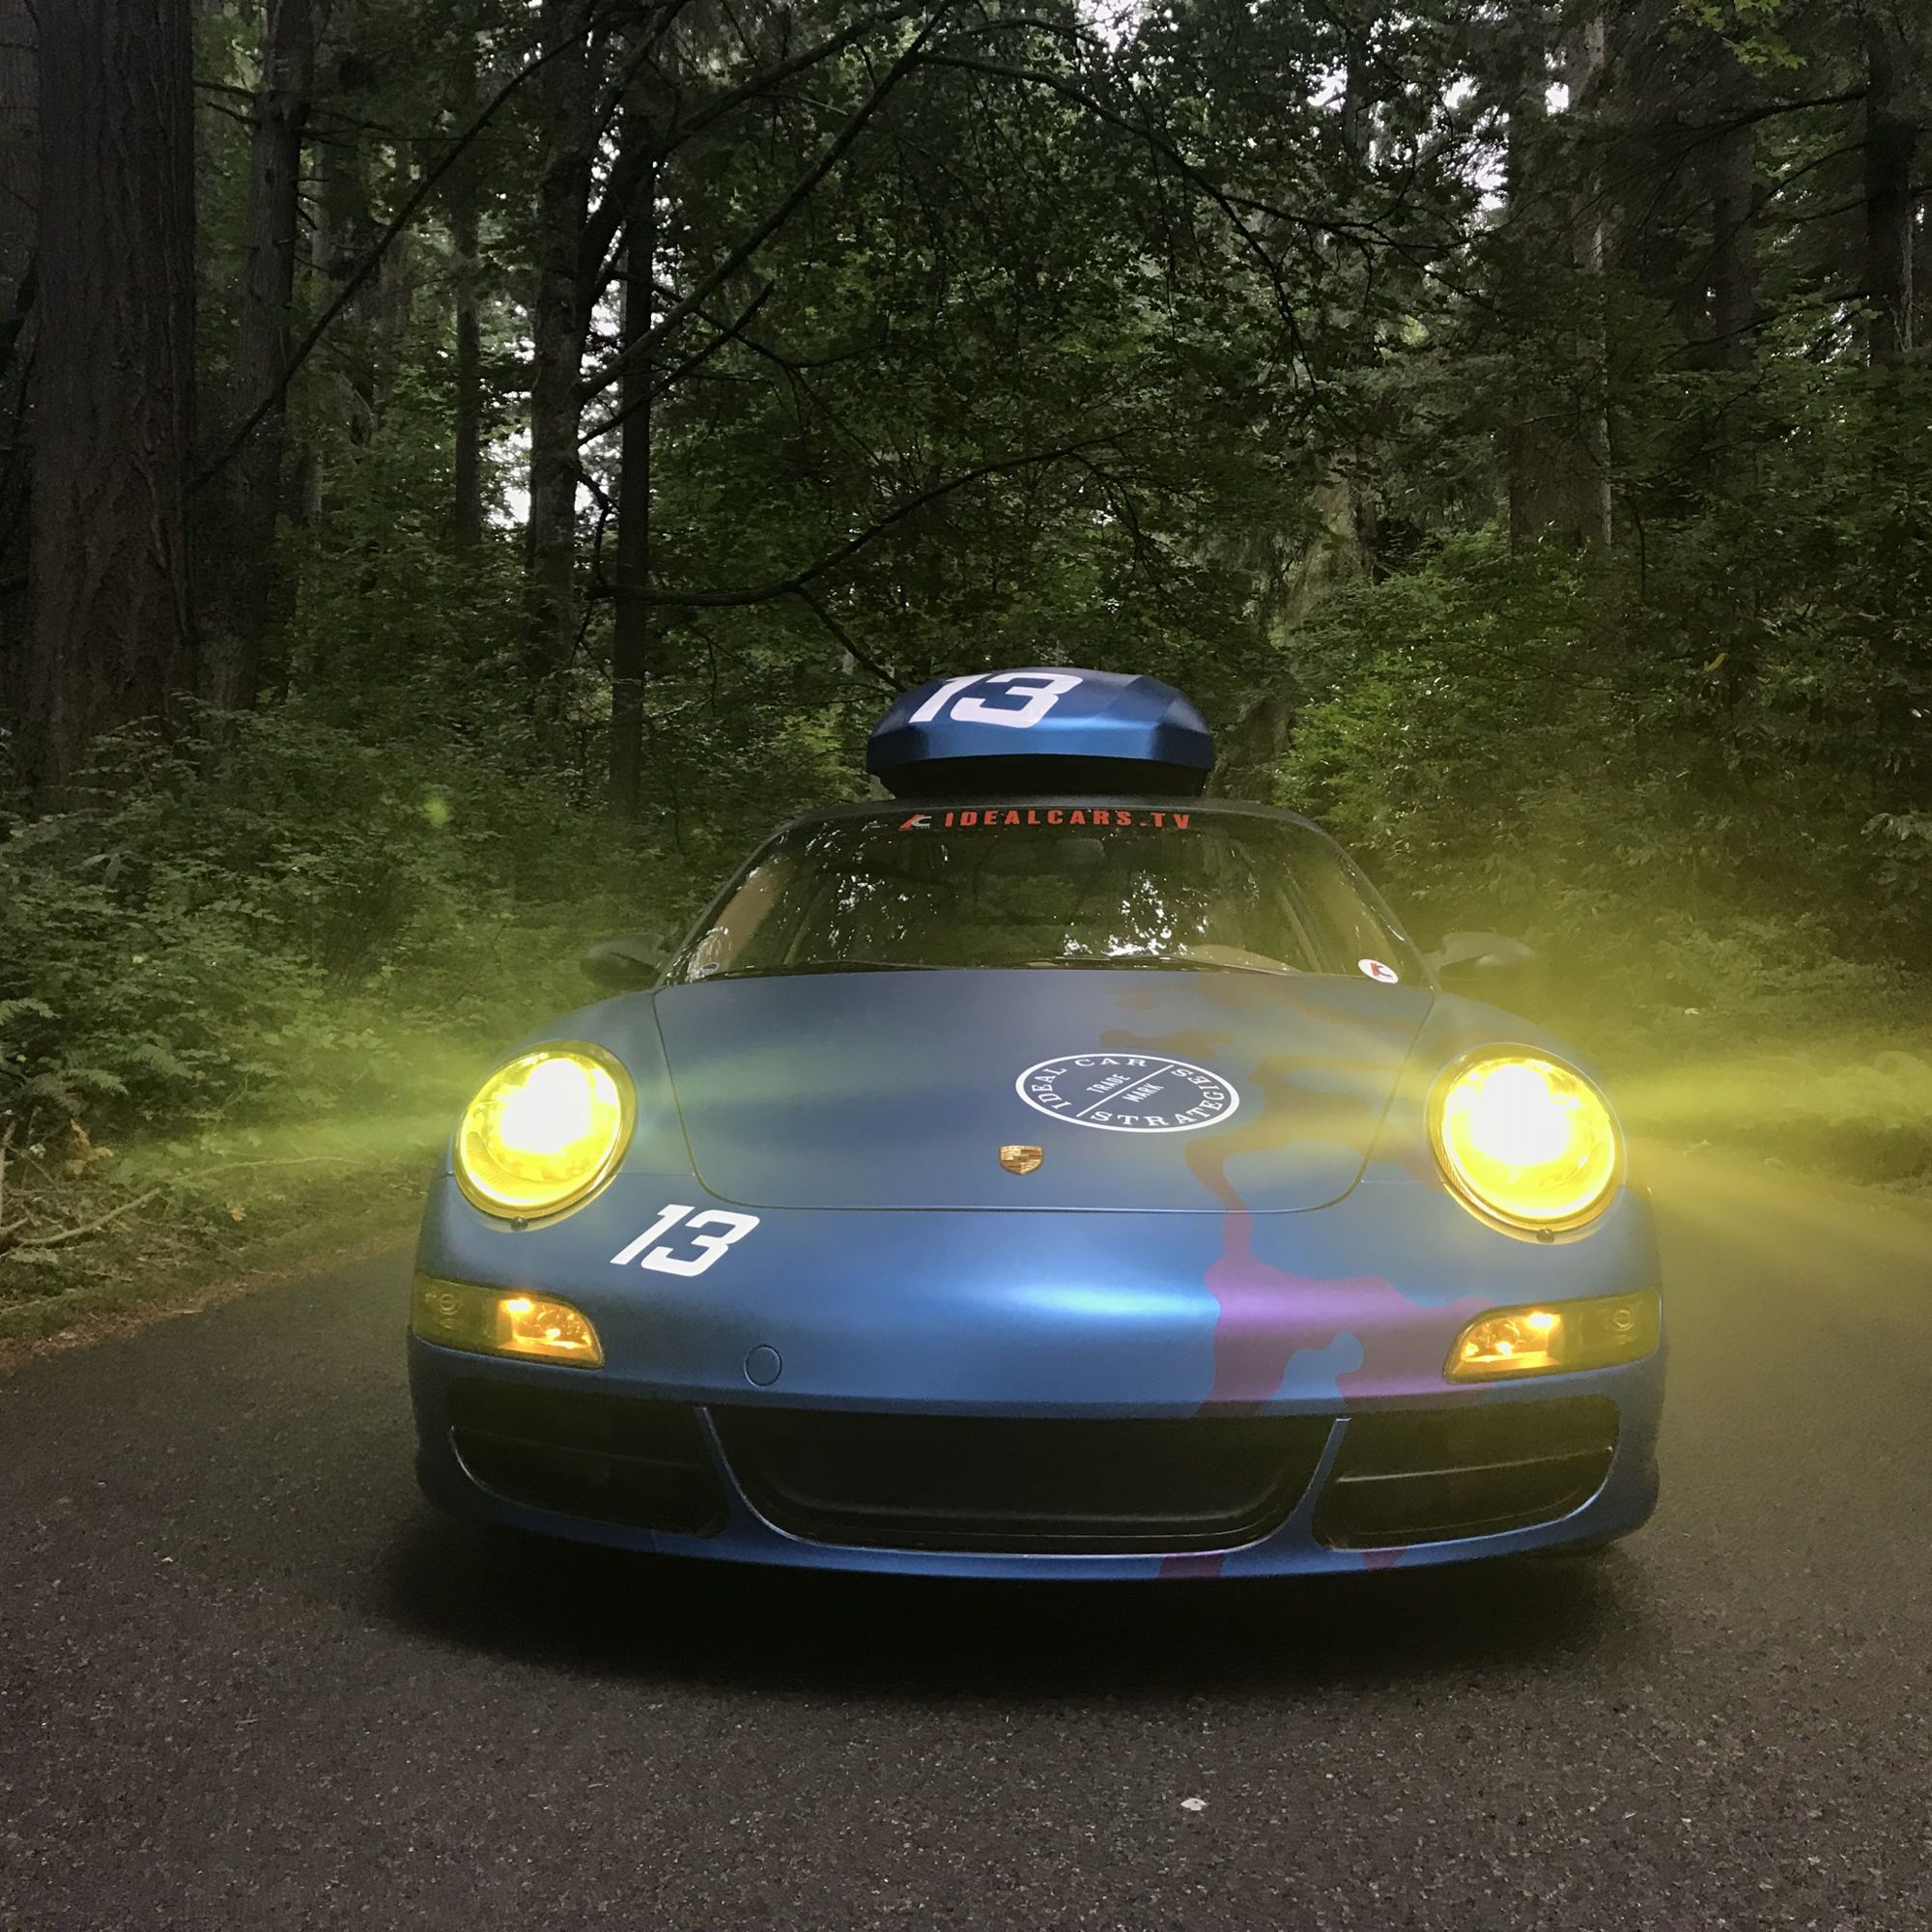 Blue Porsche 911 in a forest at twilight, headlights on